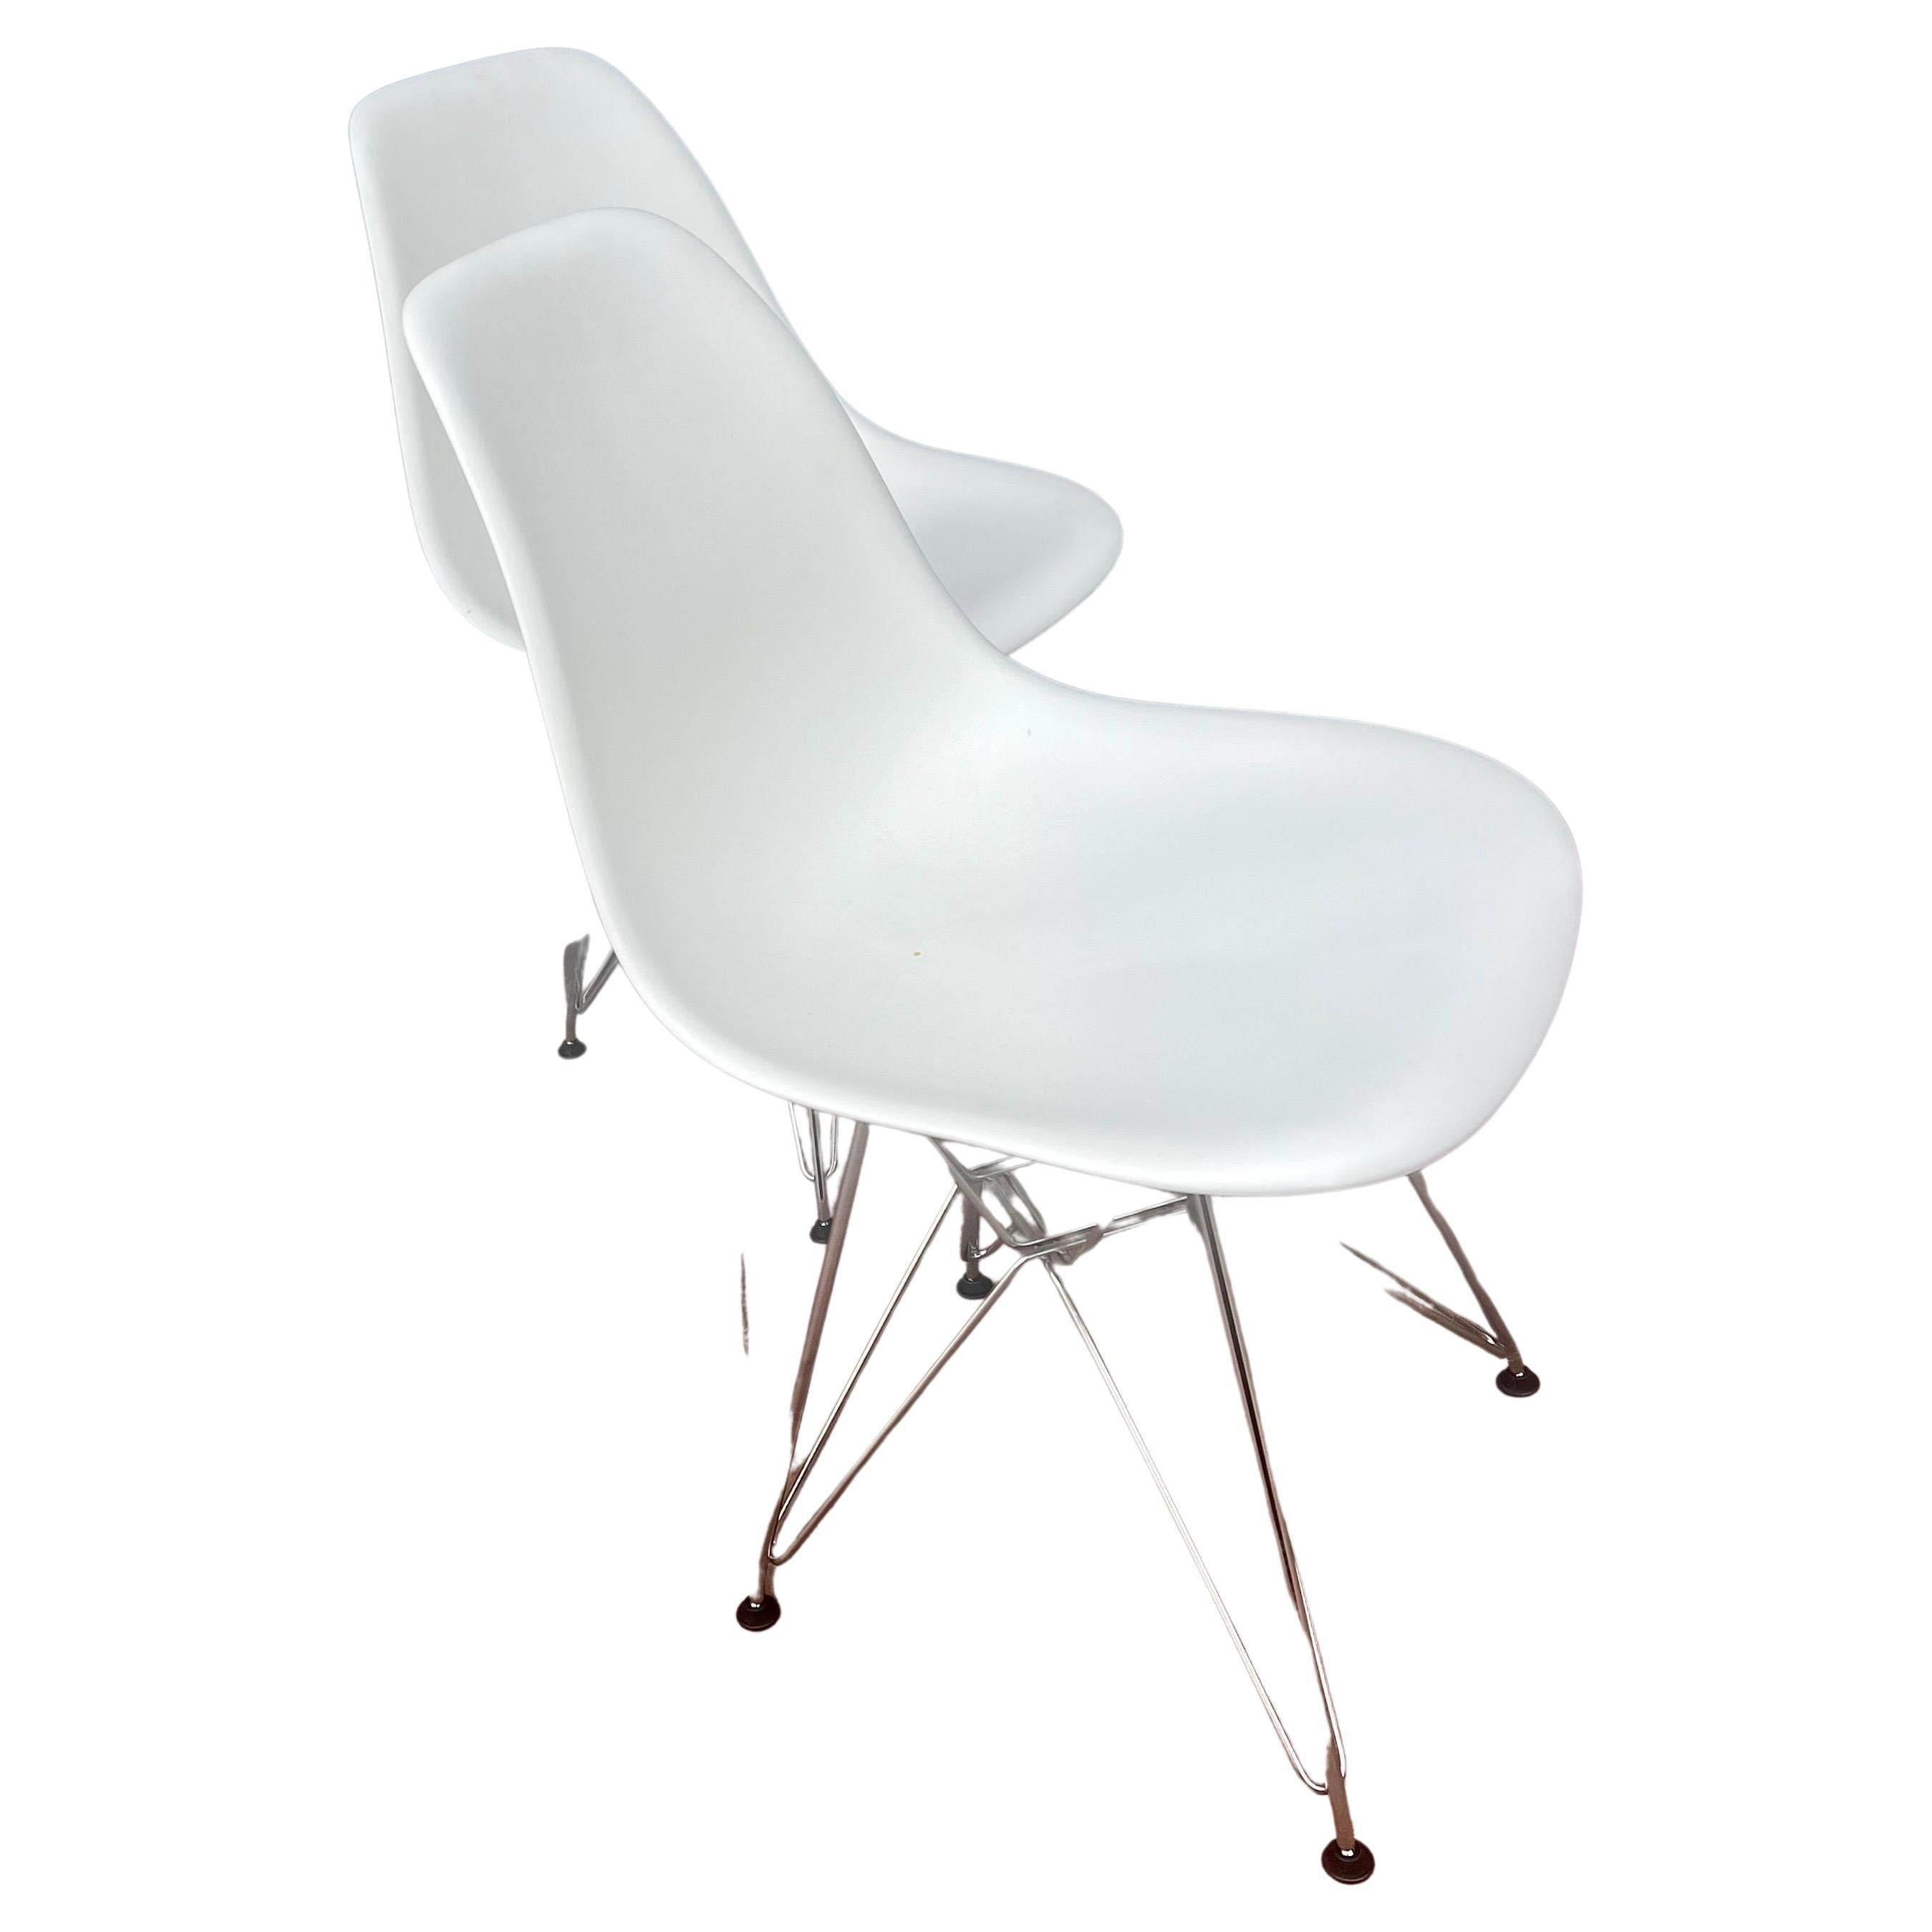 Mid-Century Modern Iconic Molded Plastic Chairs Designed by Charles Eames for Herman Miller 3 Avail